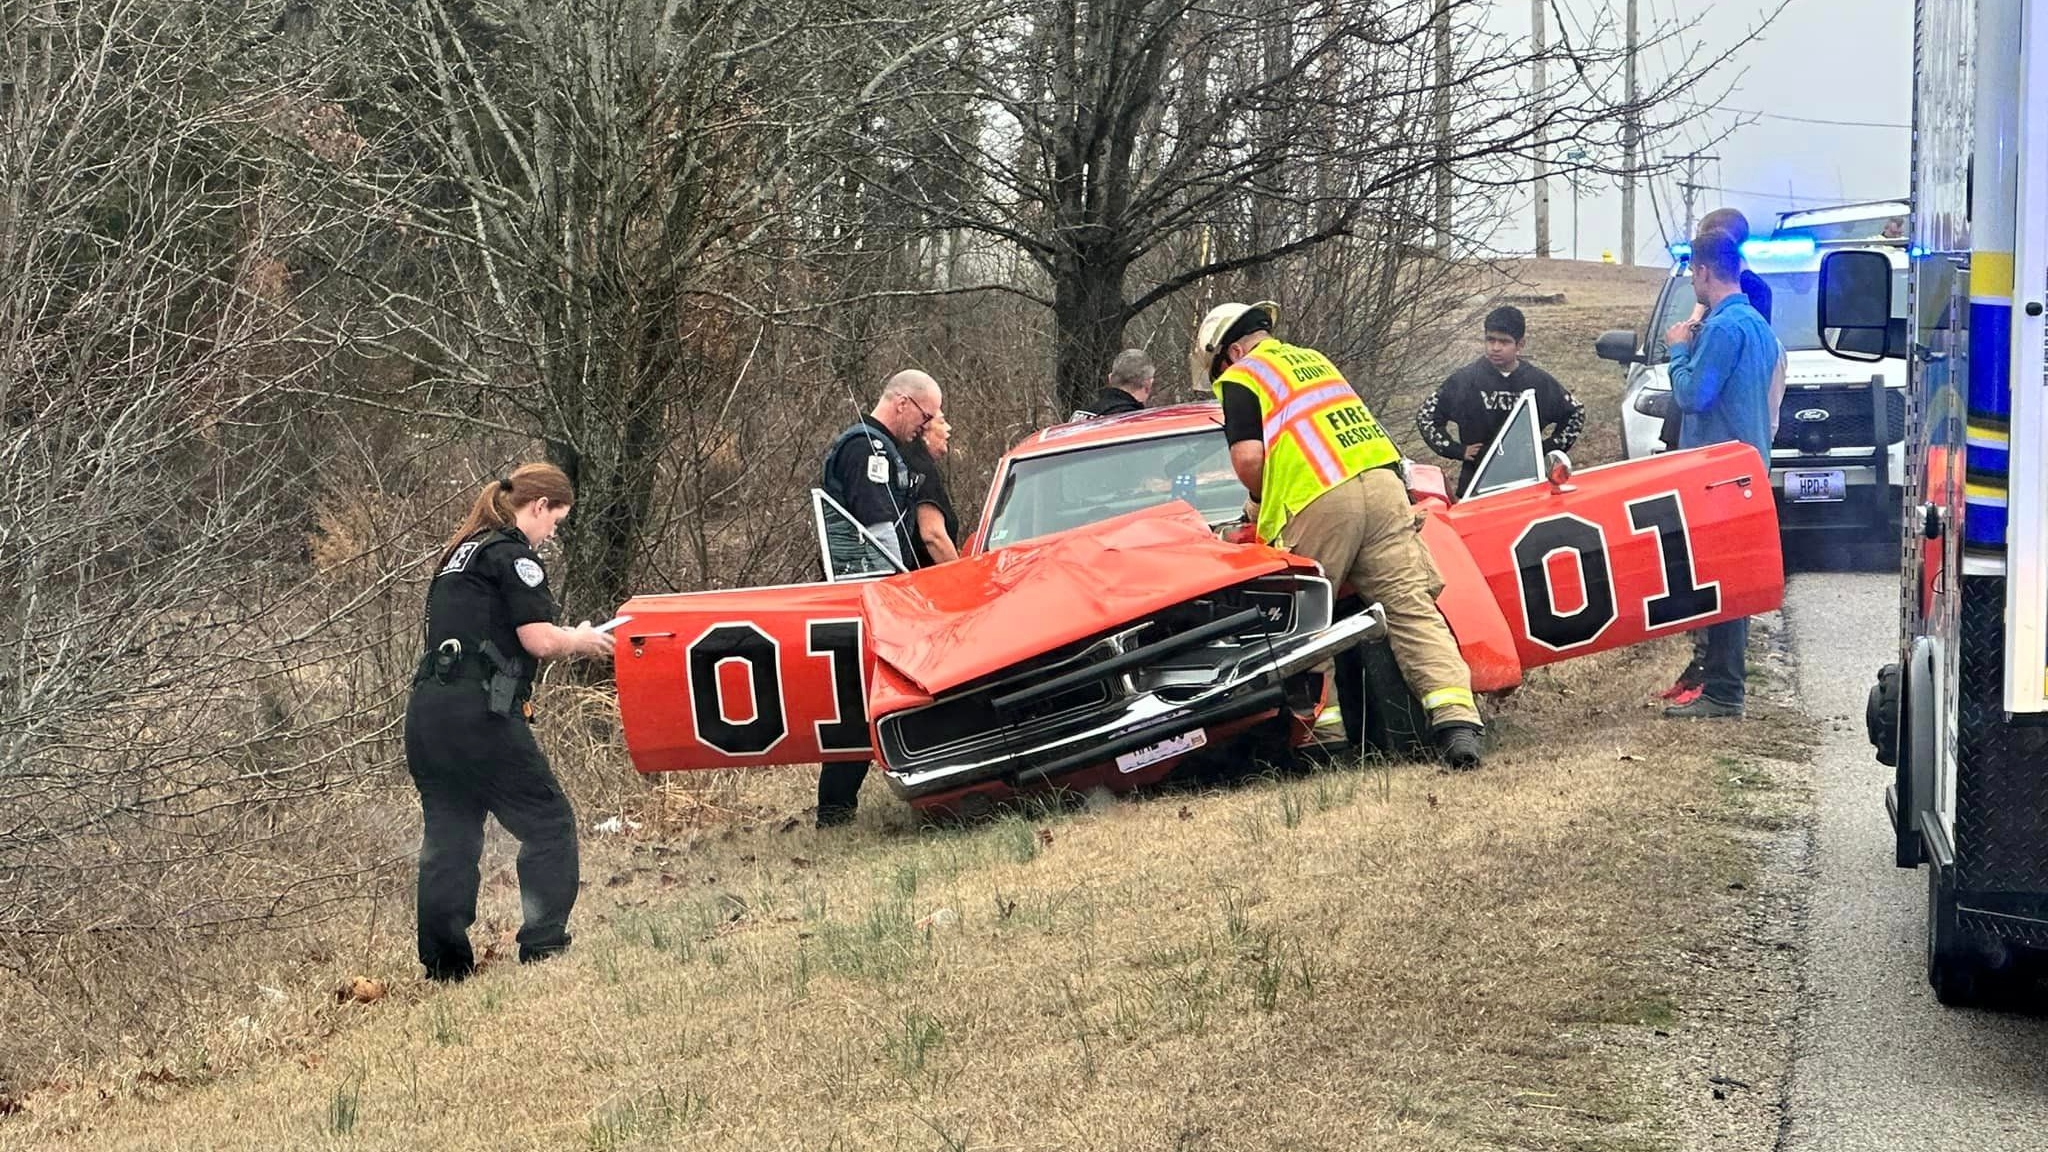 Screen-used 'The Dukes of Hazzard' General Lee involved in crash – KIRO 7  News Seattle